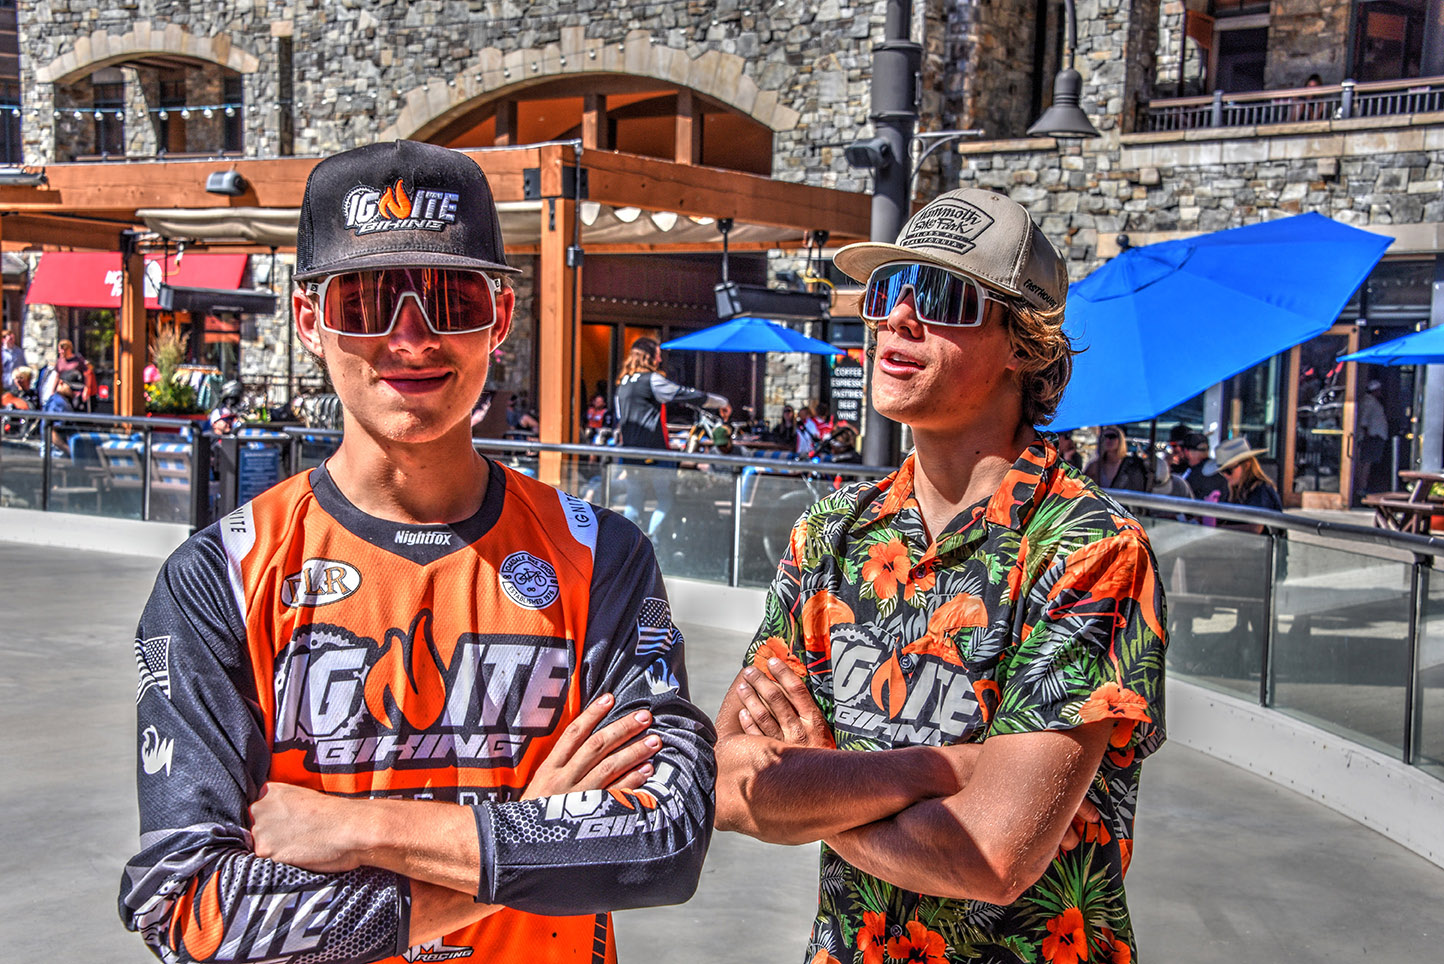 Two Ignite MTB Crew members relaxing and smiling at the finish line of the Northstar Downhill Series, wearing caps and sunglasses